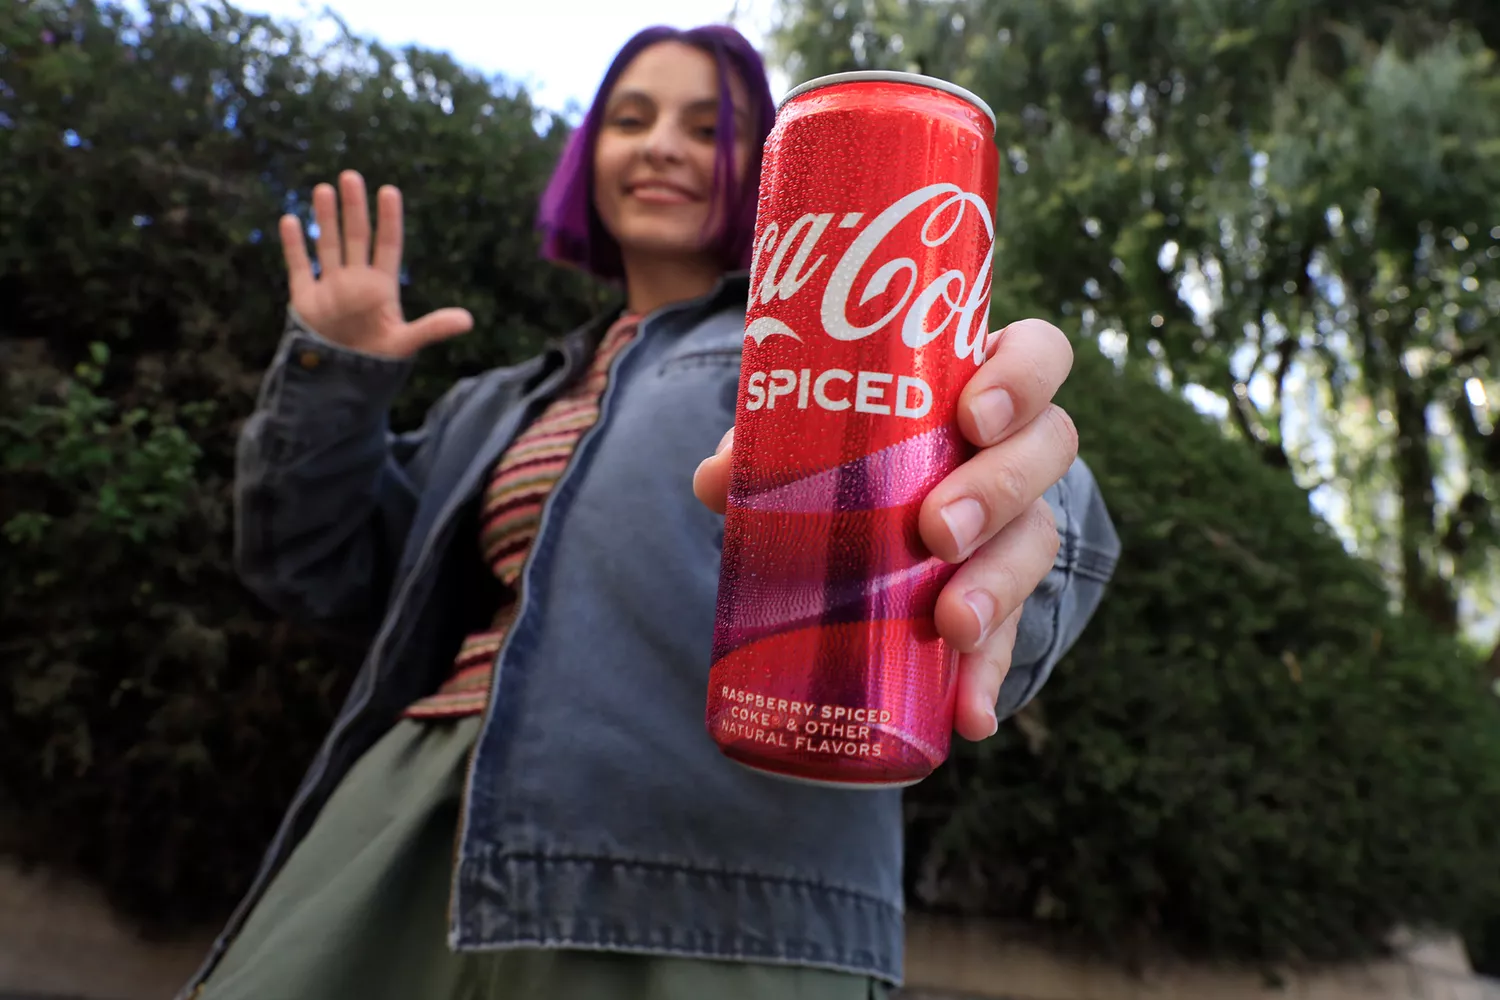 Coca-Cola Launches New 'Spiced' Flavor with Raspberry Twist